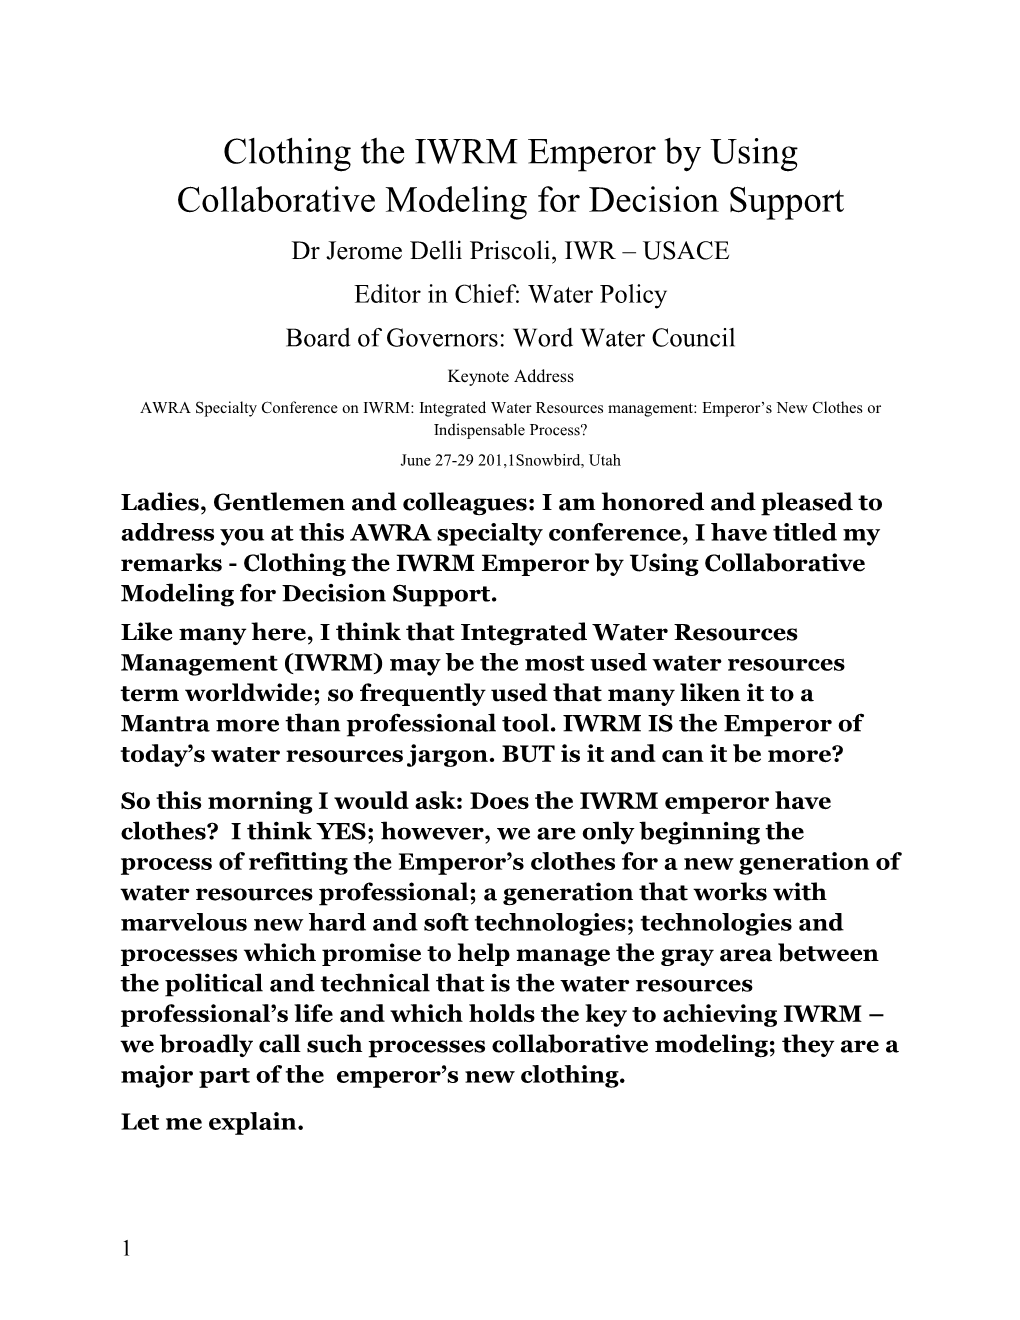 Clothing the IWRM Emperor by Using Collaborative Modeling for Decision Support